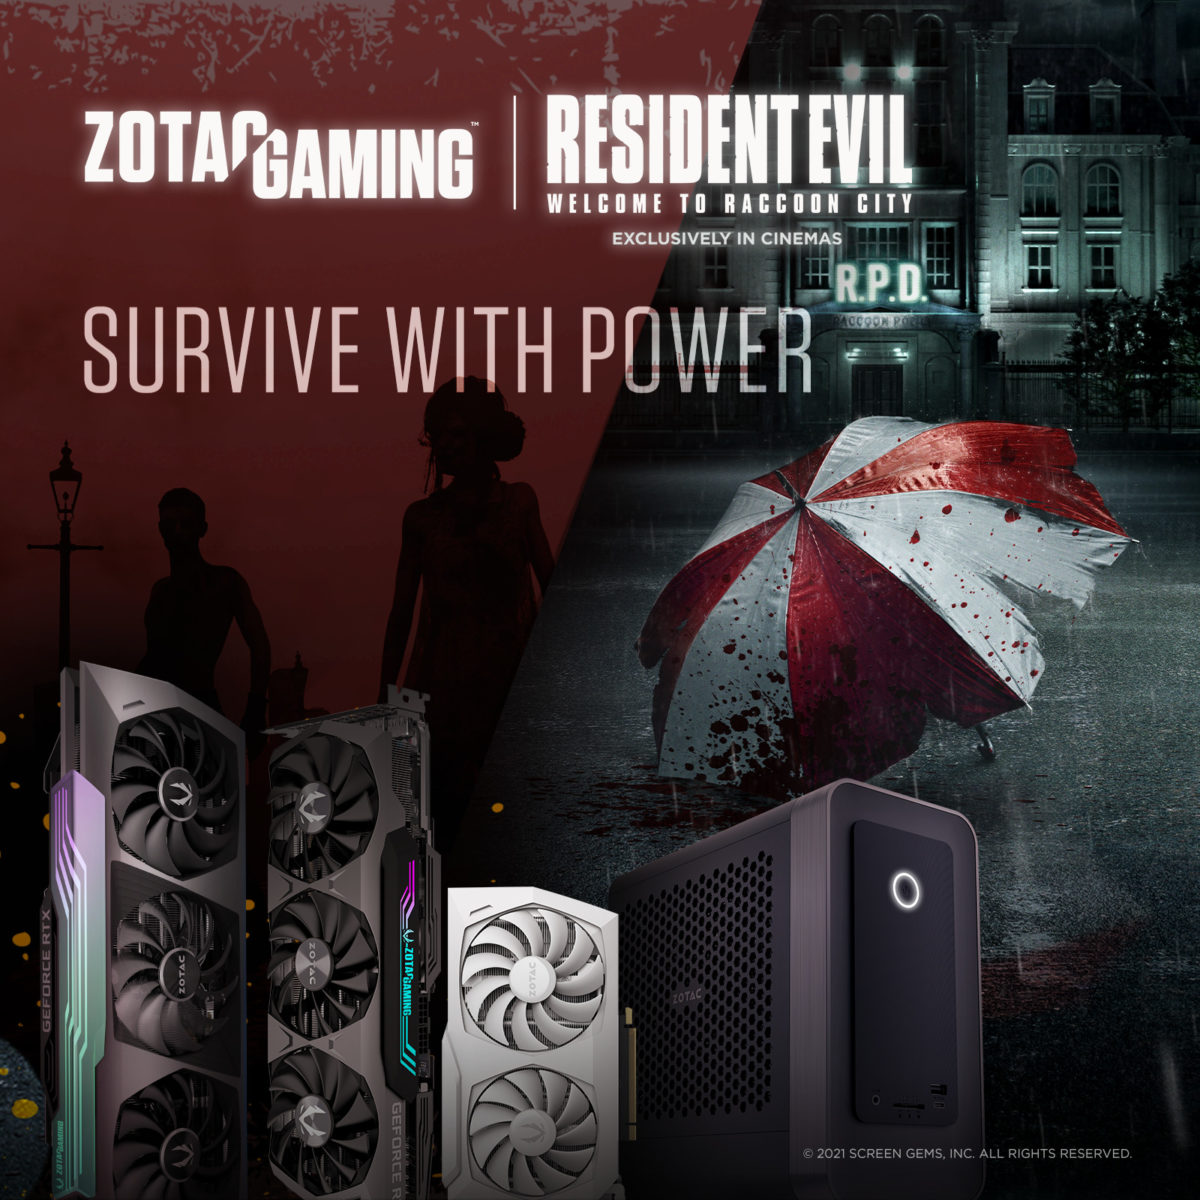 GIVEAWAY: ZOTAC GAMING x Resident Evil: Welcome to Raccoon City -